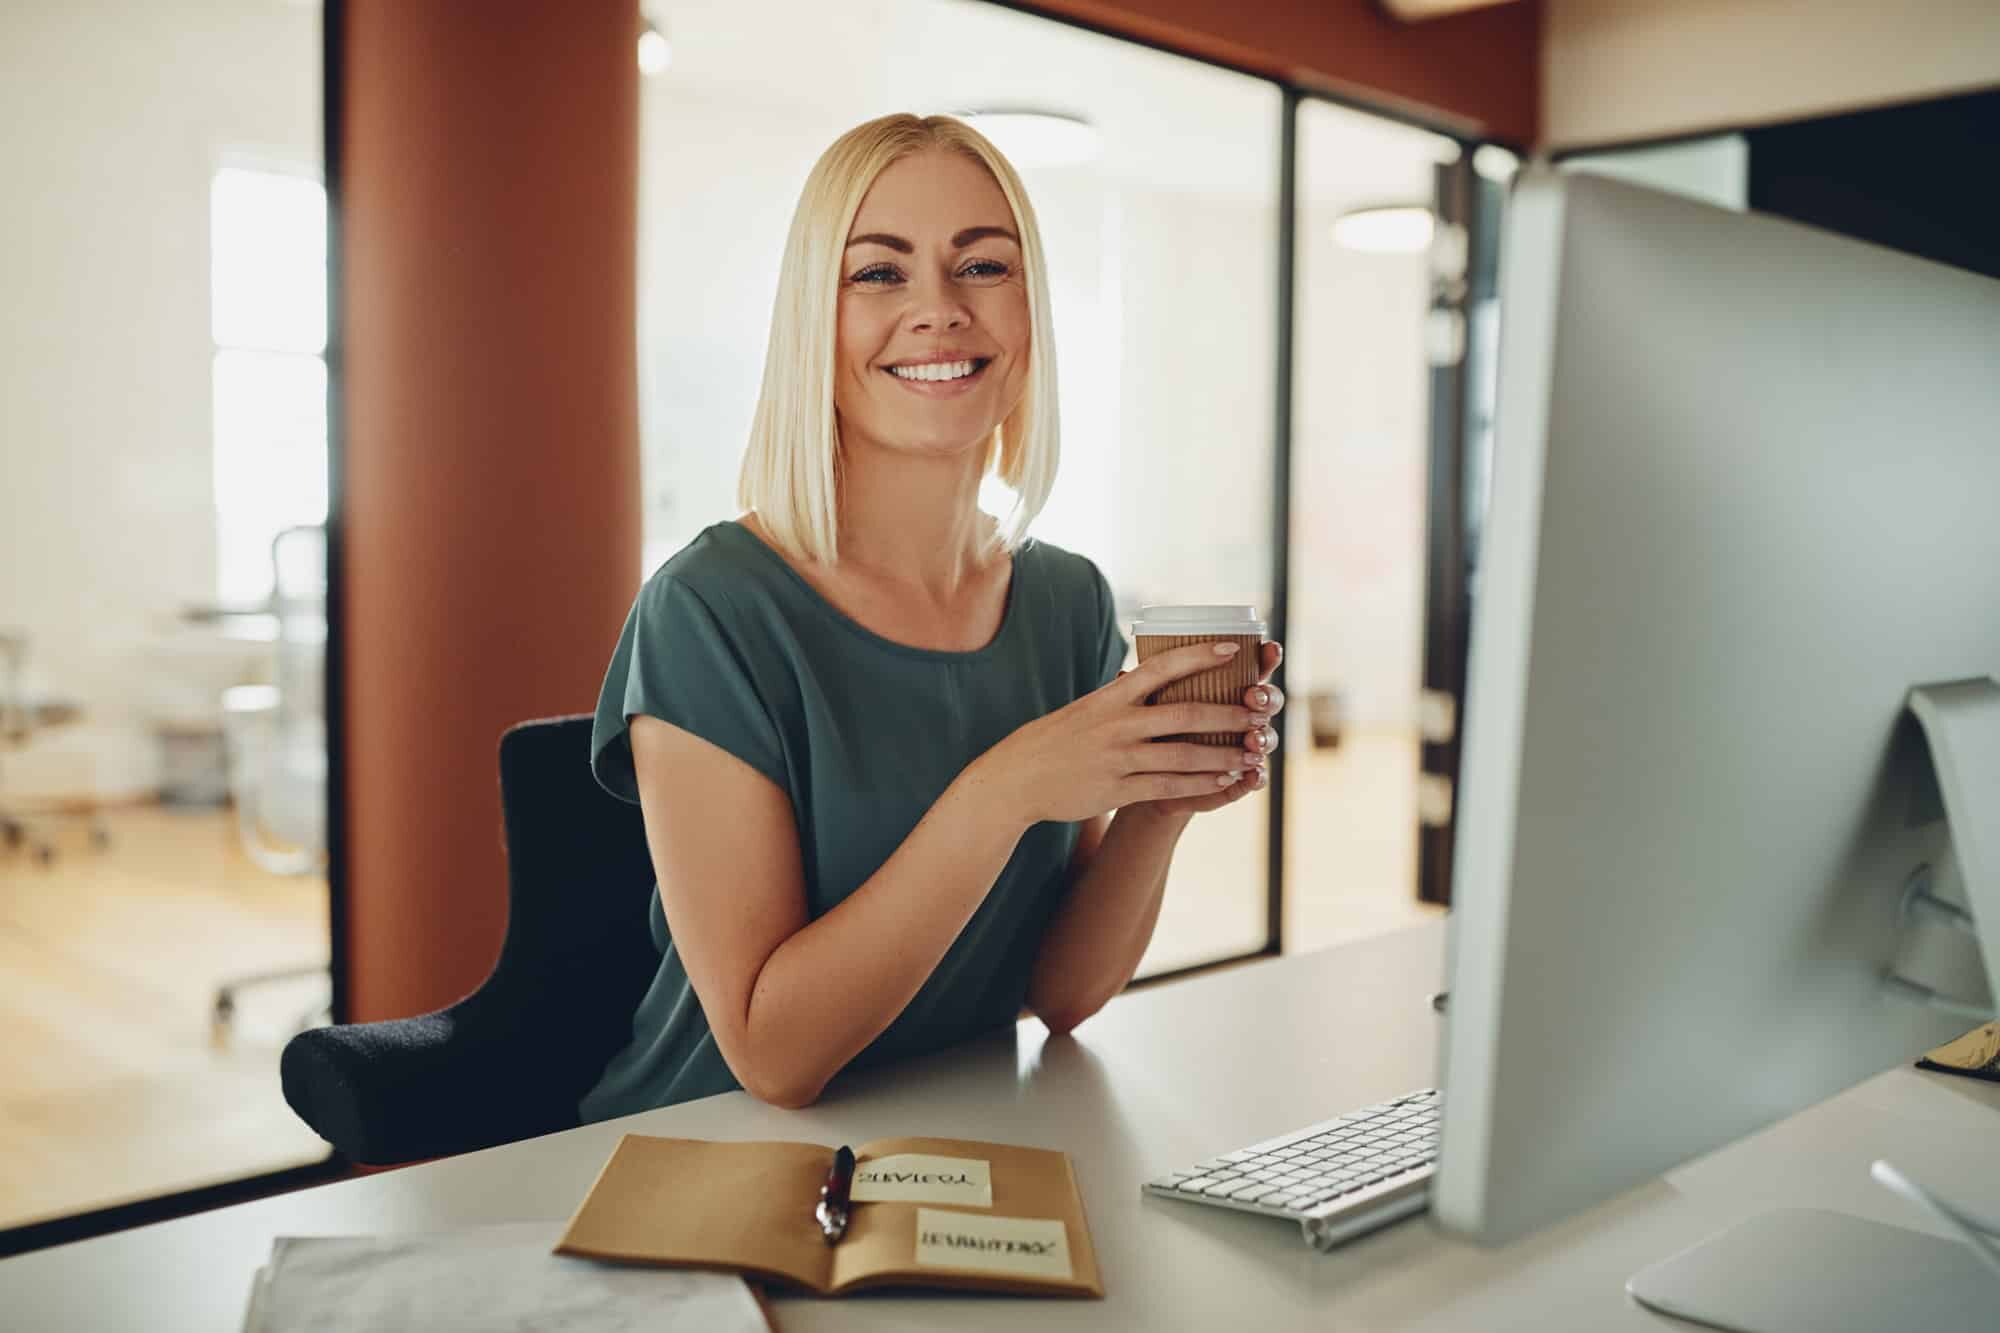 Woman Smiling and drinking coffee in front of computer.